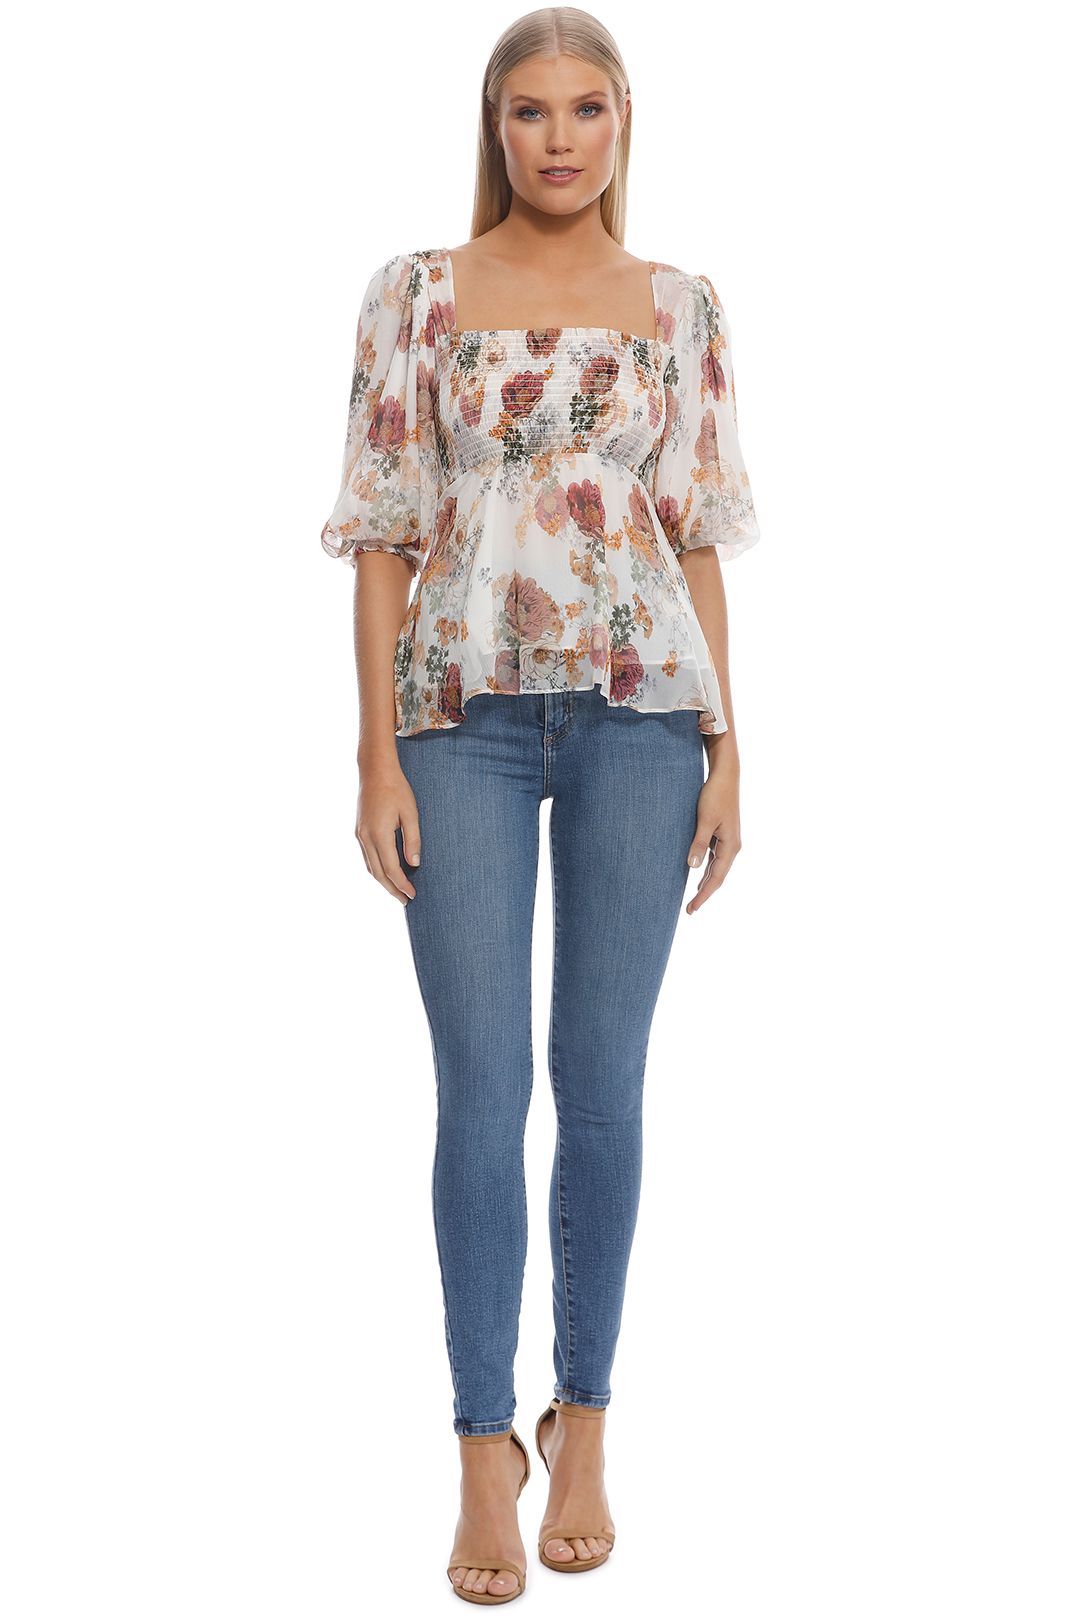 Nicholas The Label - Ivory Floral Square Neck Top - Ivory Floral - Front